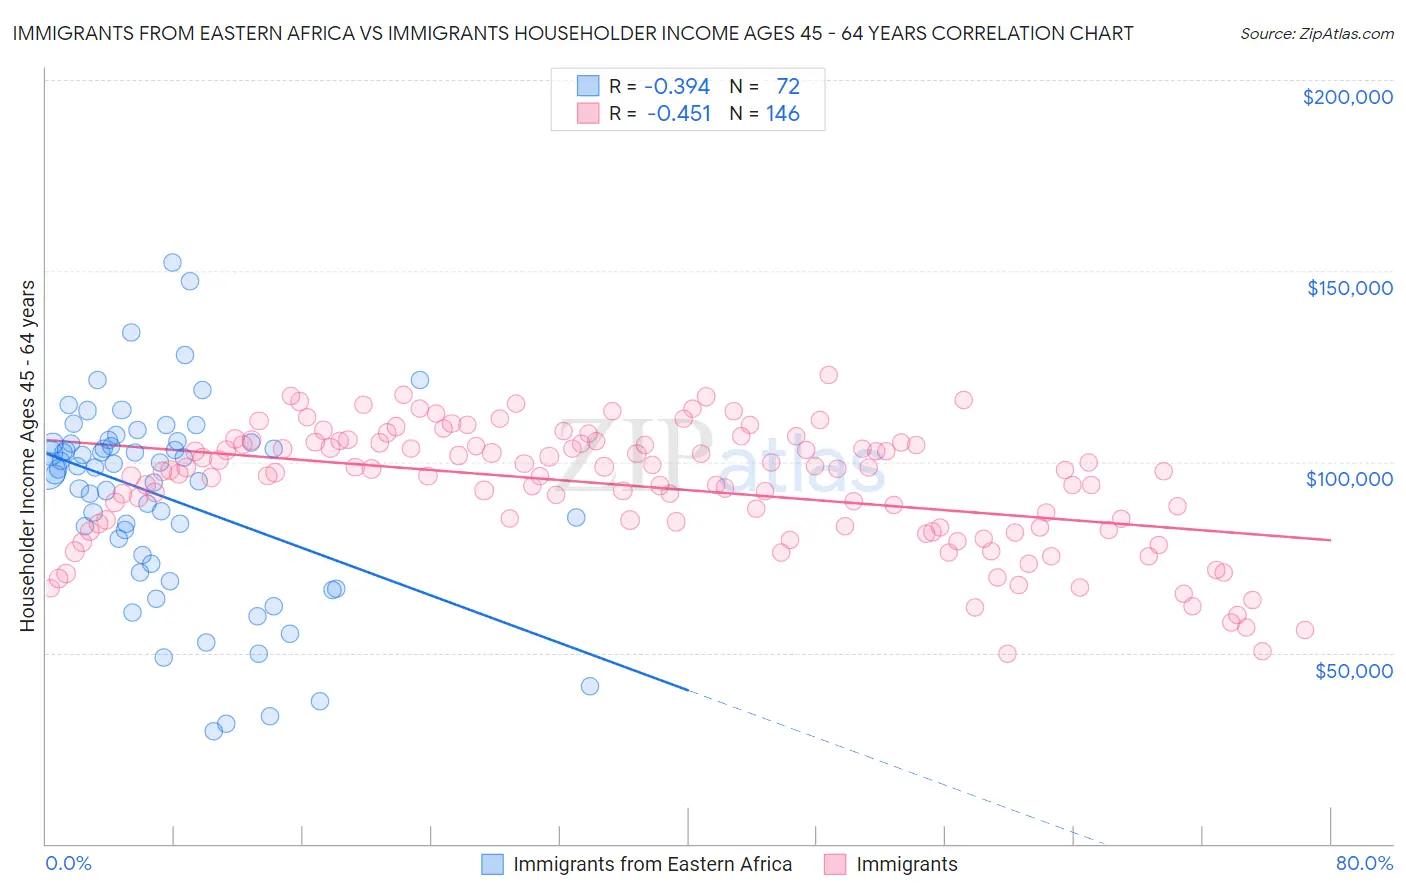 Immigrants from Eastern Africa vs Immigrants Householder Income Ages 45 - 64 years